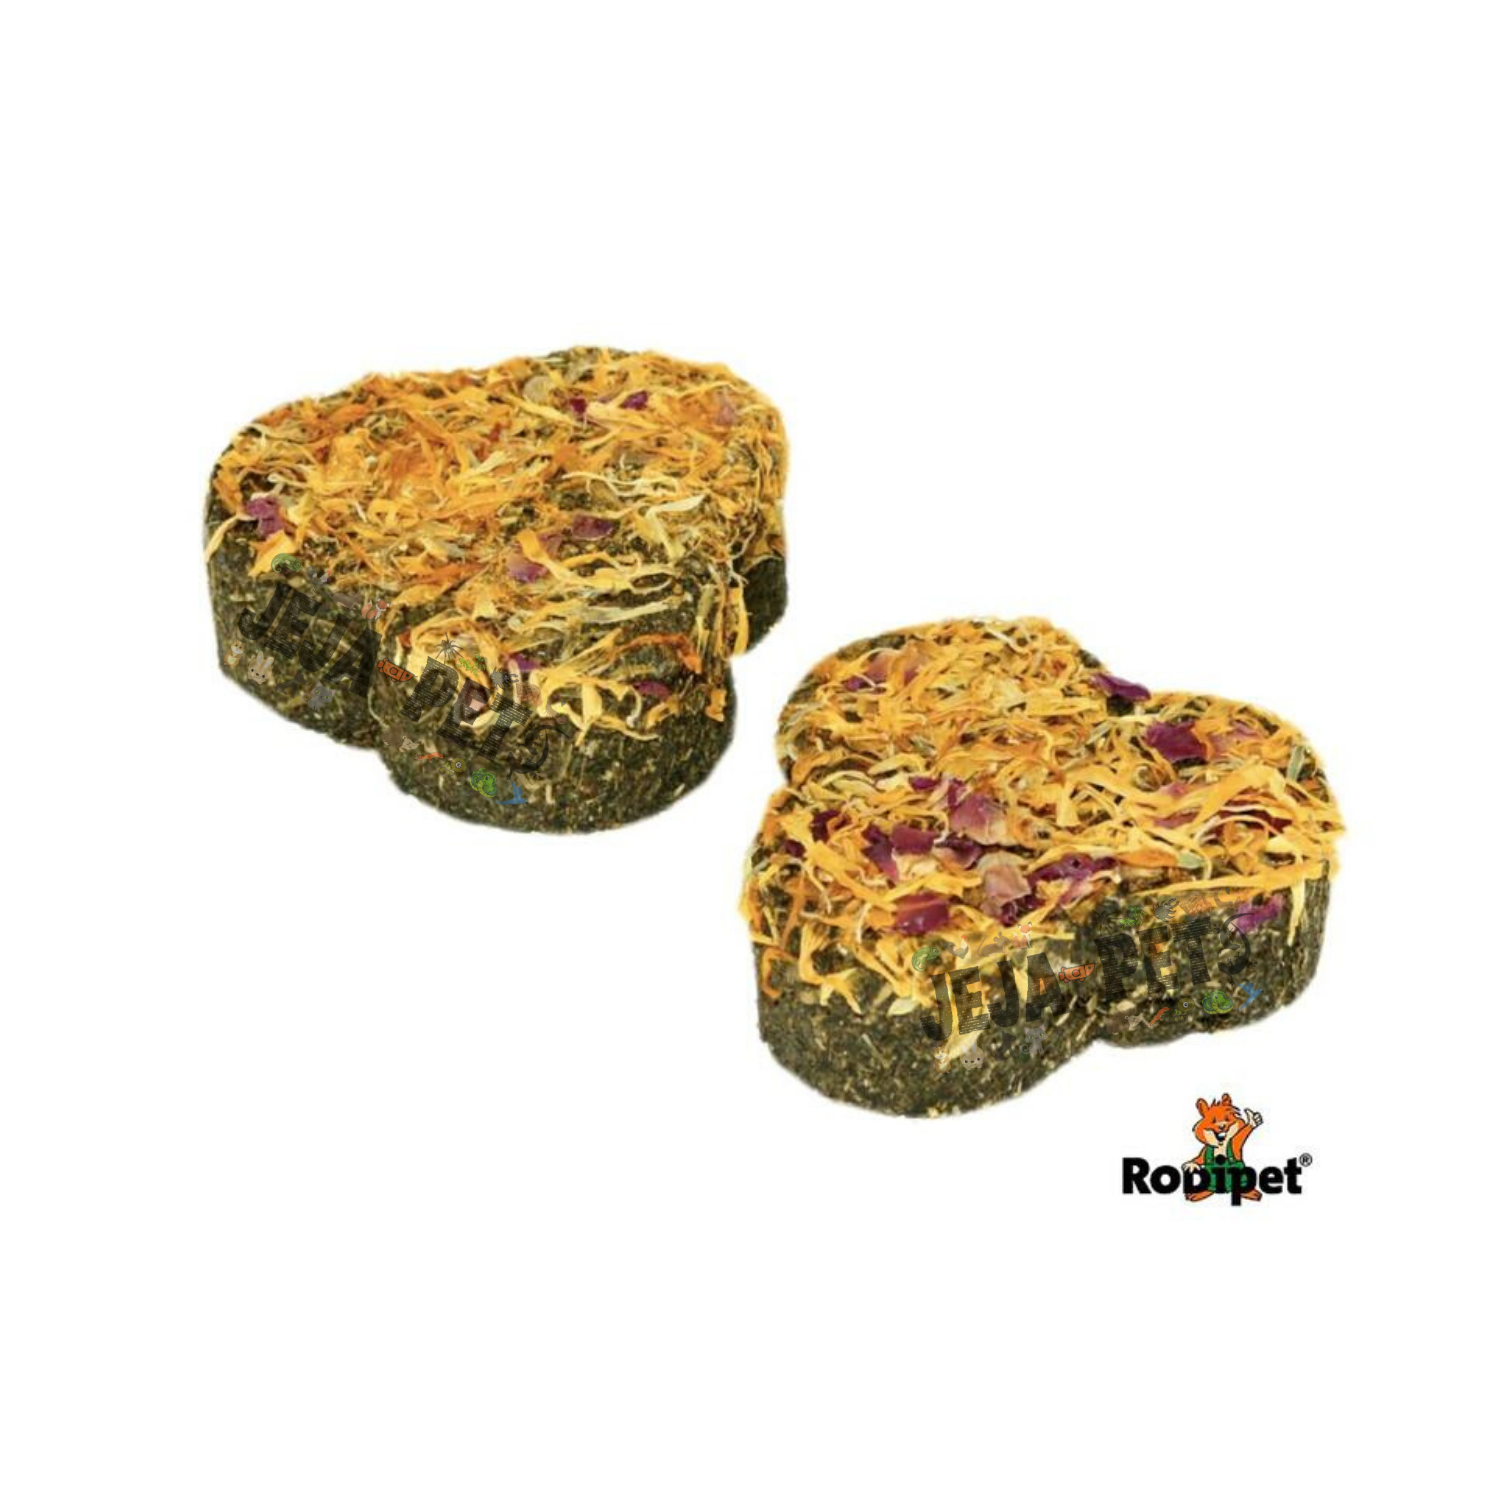 Rodipet Herb and Flower Crackers - Pack of Two